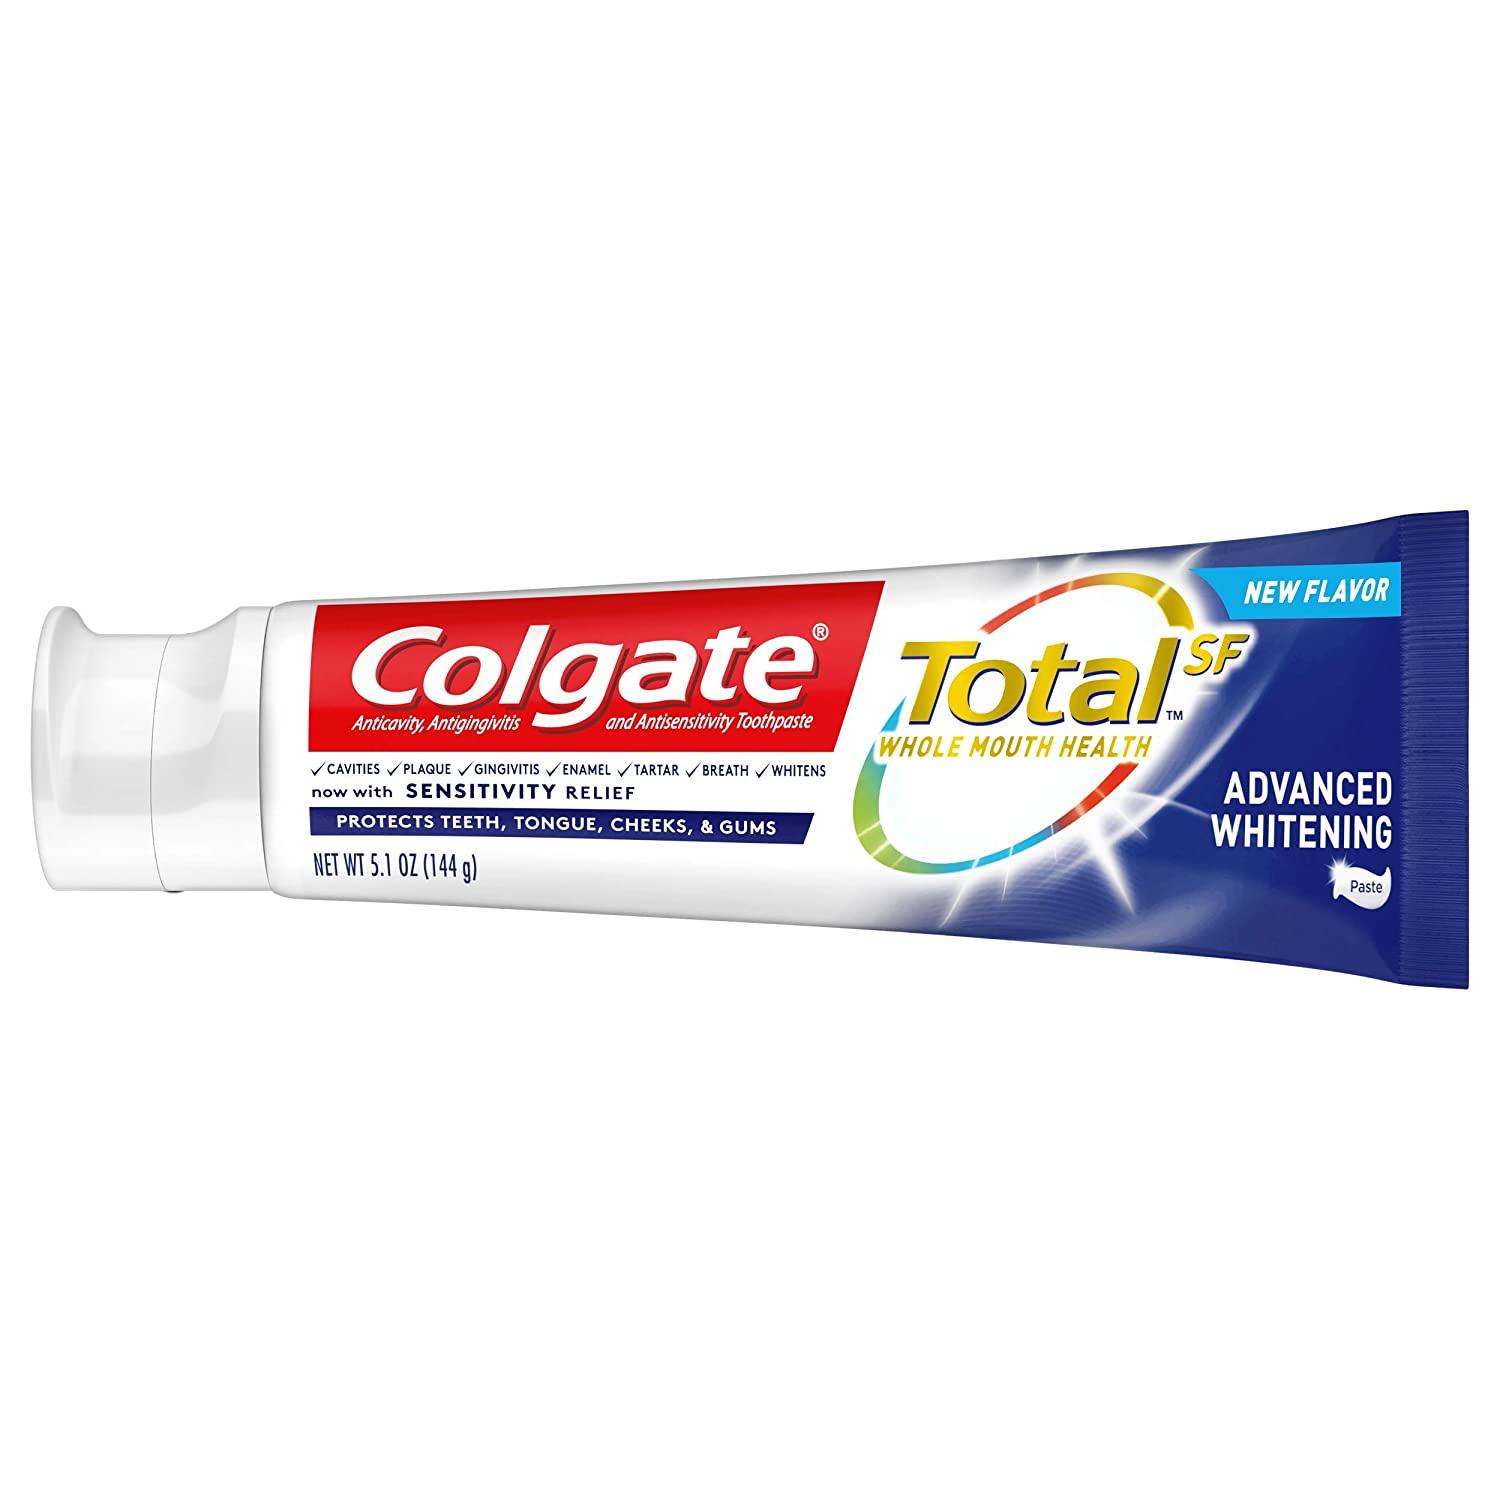 Colgate Total Advanced Whitening Toothpaste for $1.42 Shipped